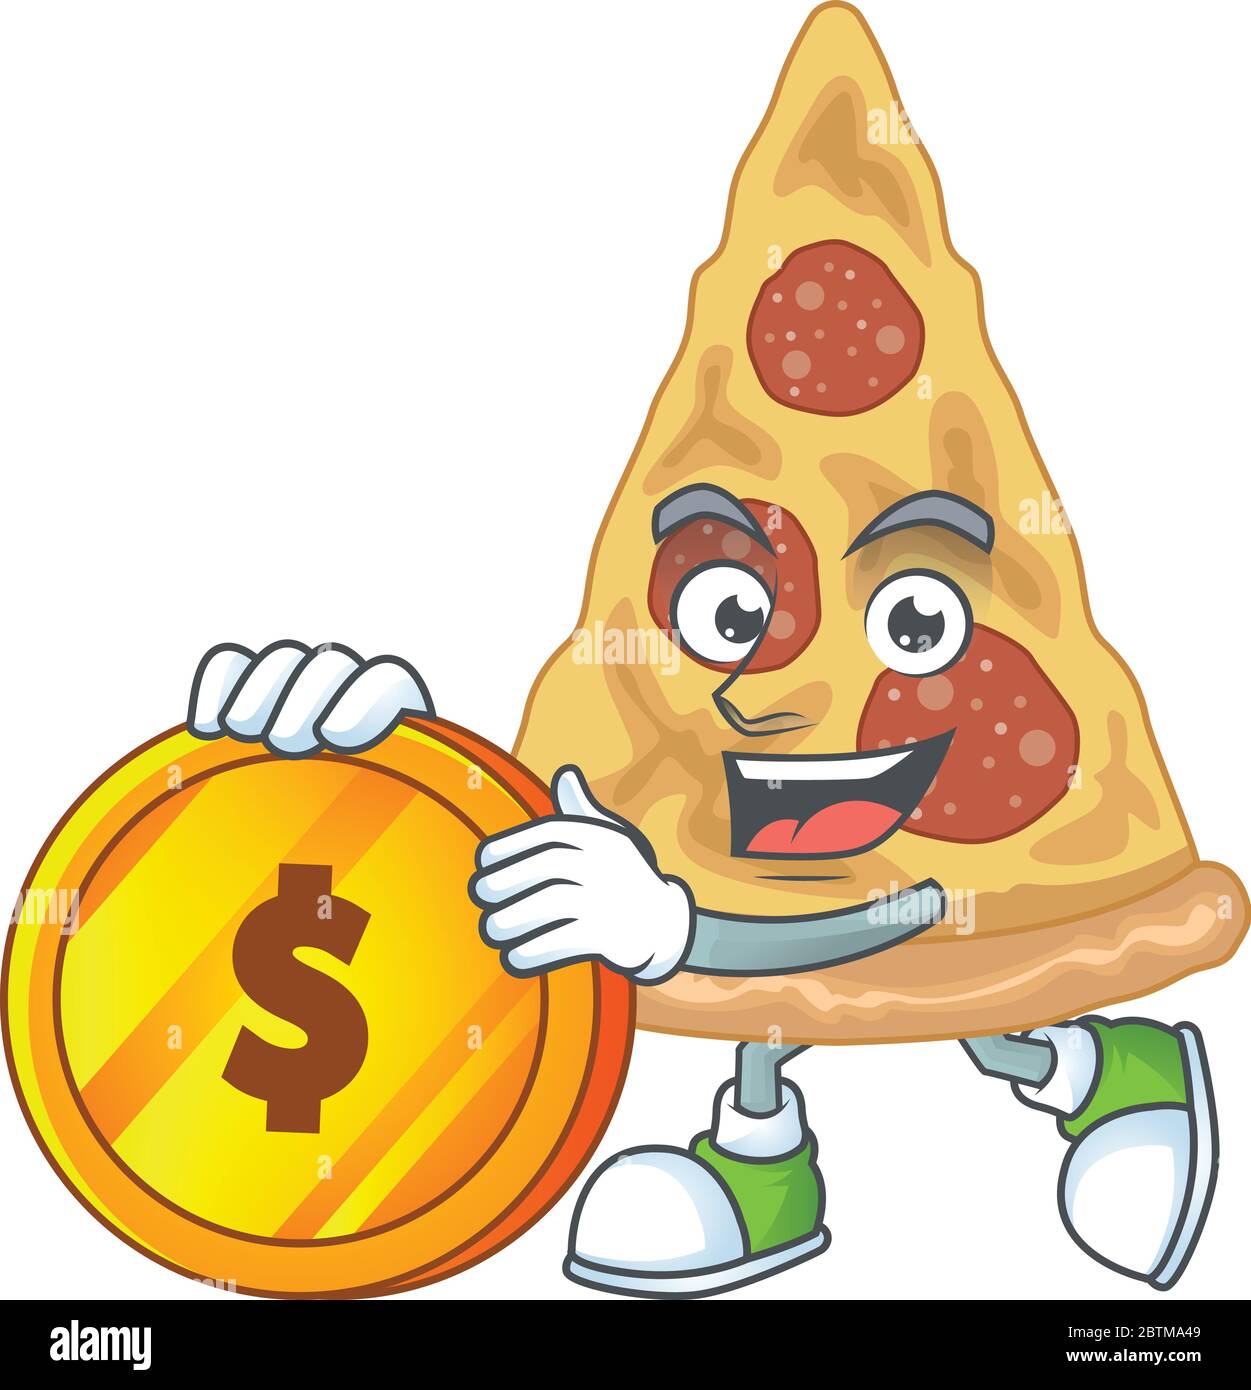 cartoon picture of slice of pizza rich character with a big gold coin Stock Vector